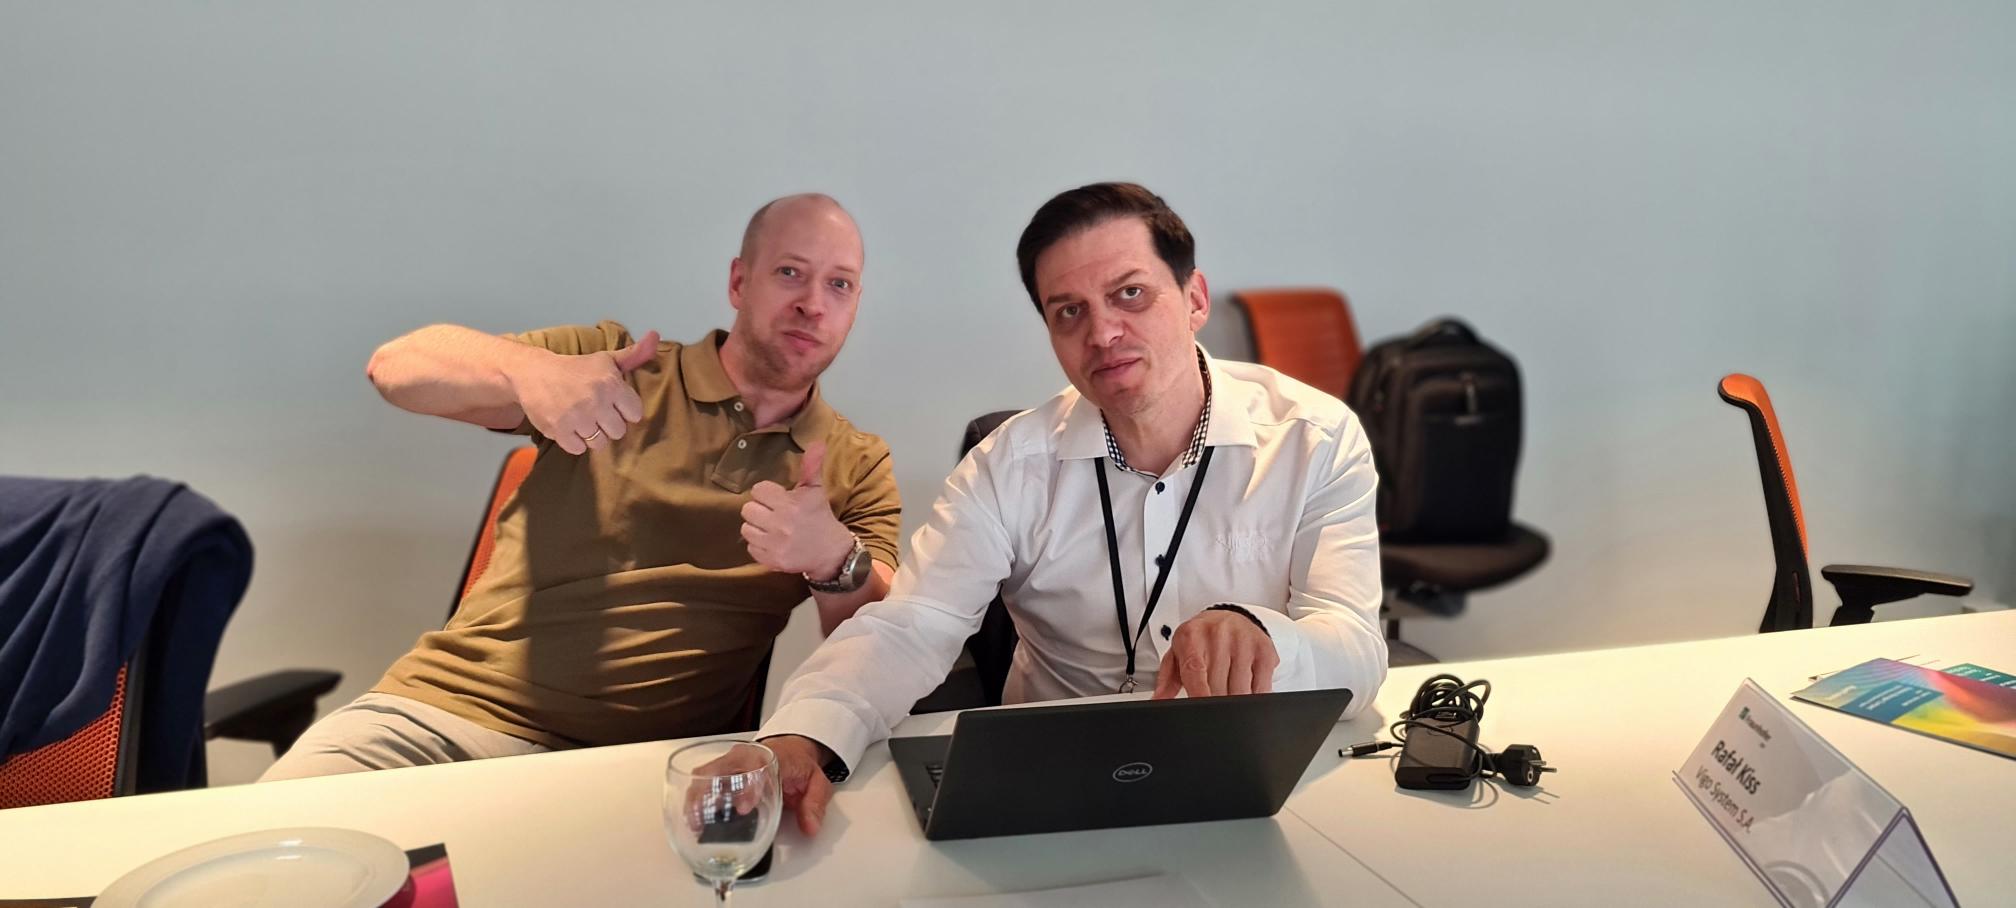 Two men sit together at the computer and give the thumbs up to the camera at the Photonics Manager Compact 2022.